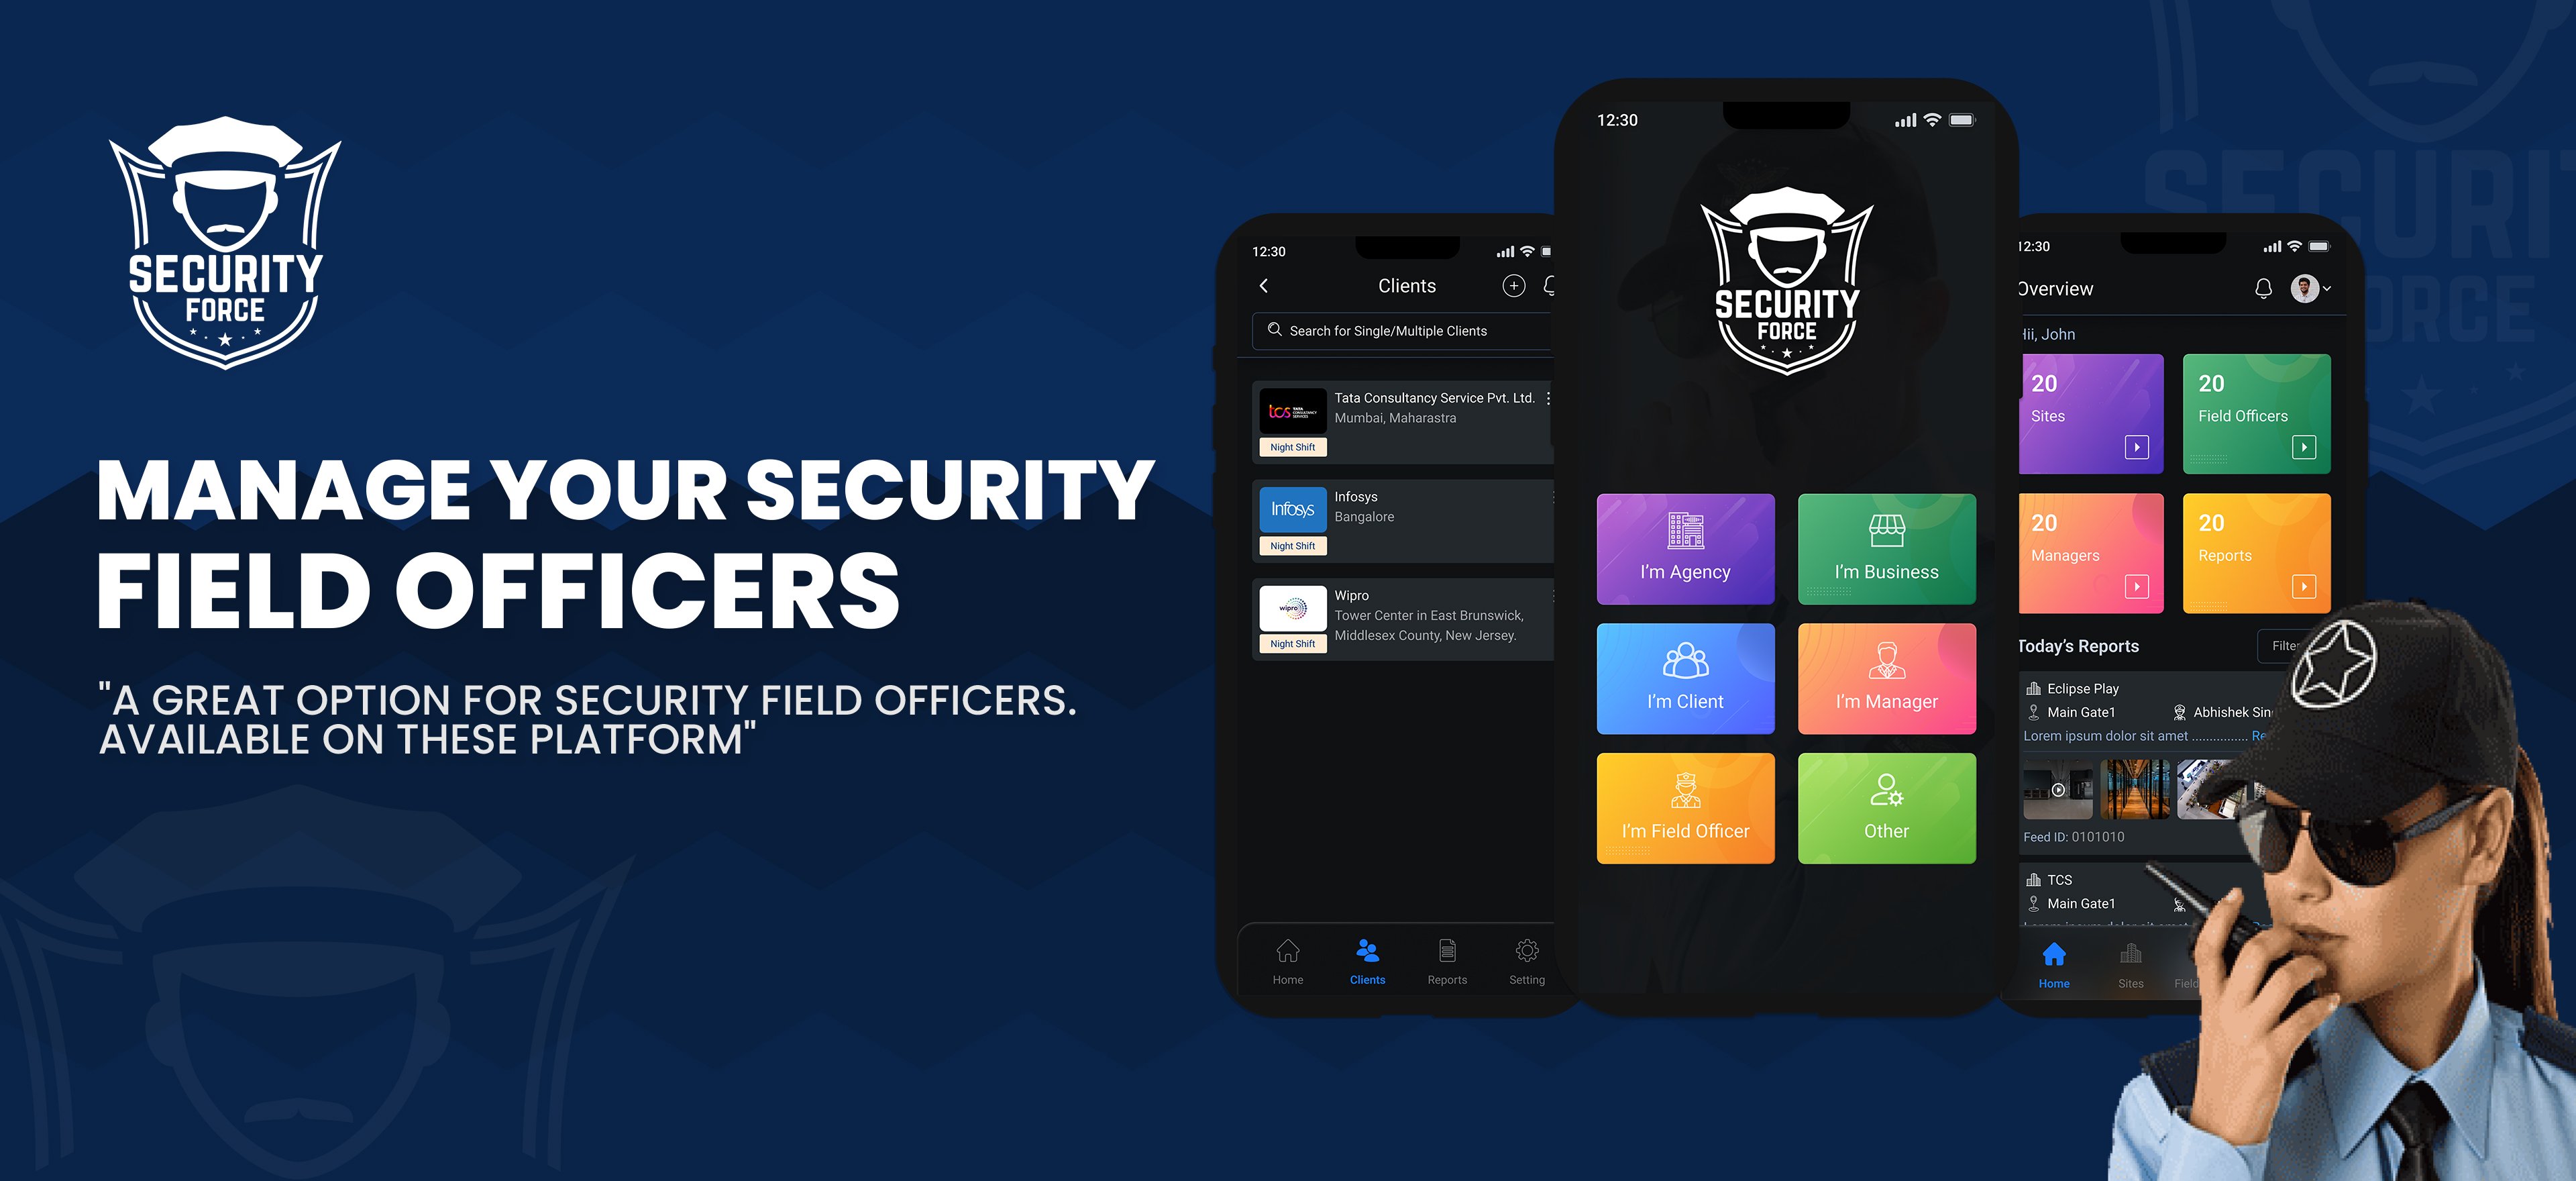 Home page Security Force Banner